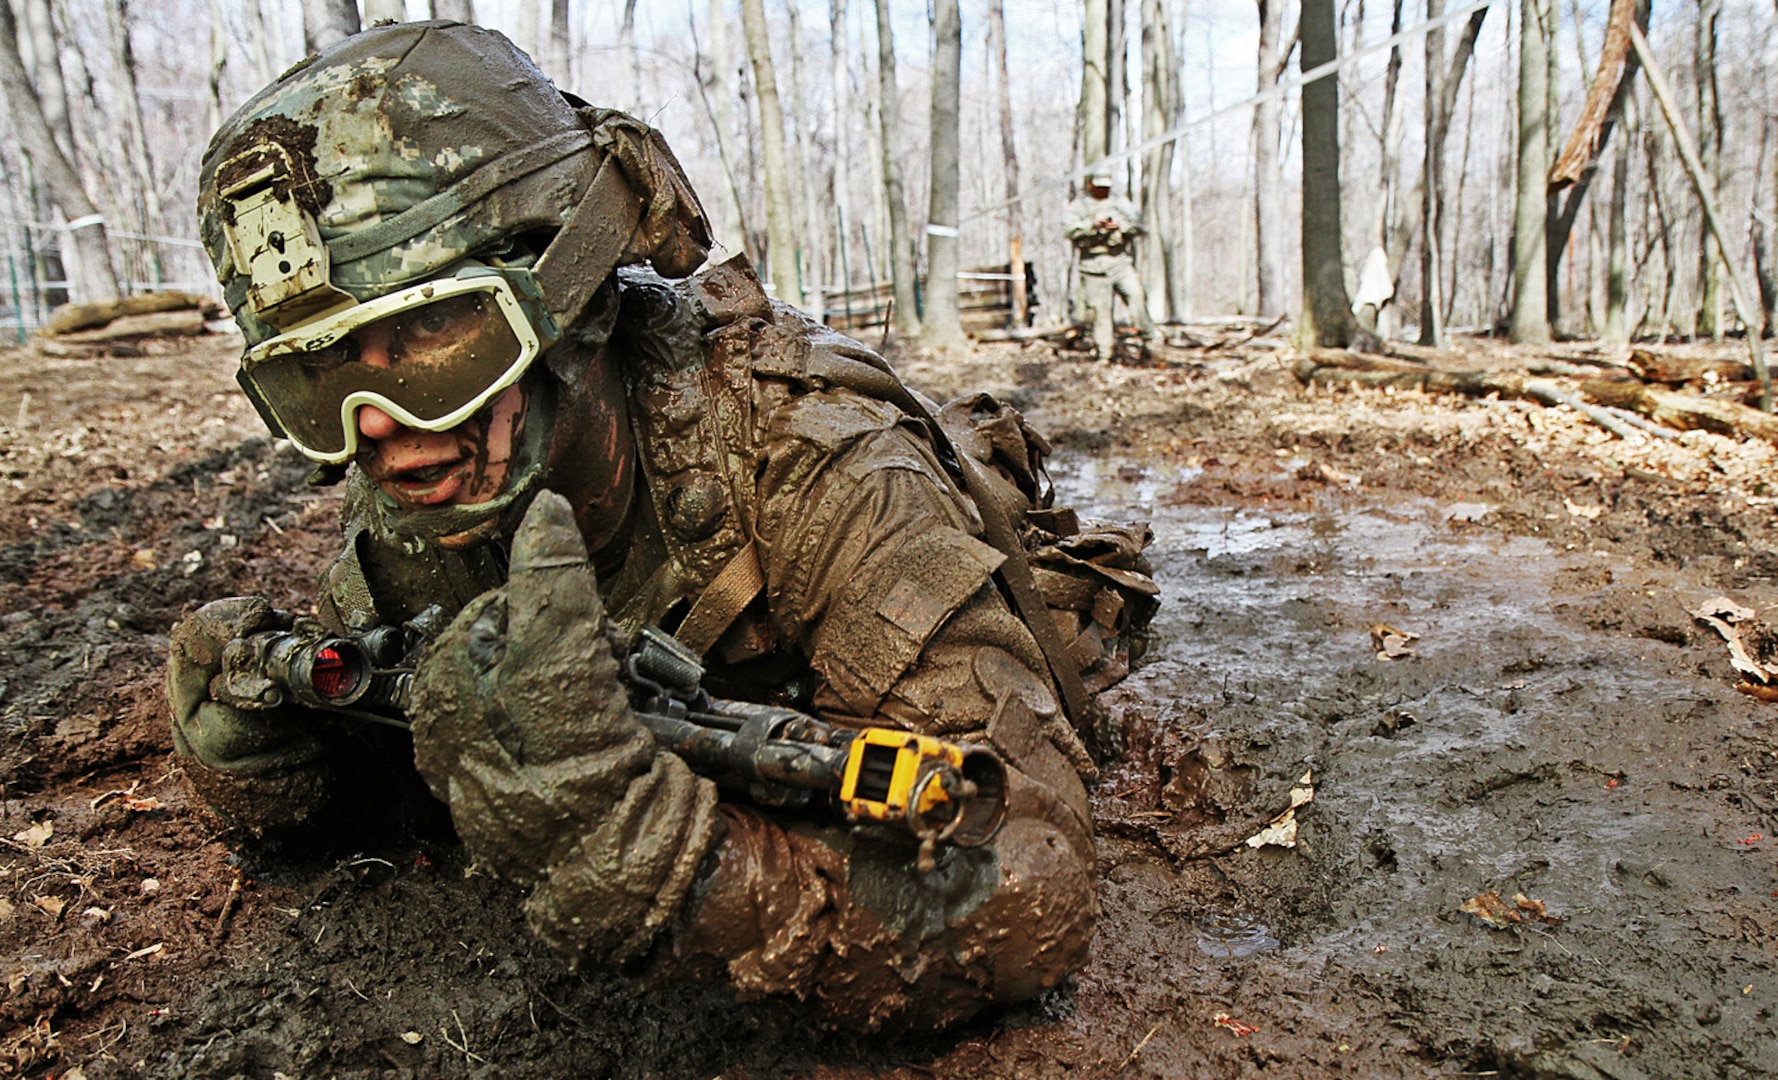 Crawling through mud, Army Pvt. Charles Shidler, Alpha Company, Special Troops 
Battalion, 37th Infantry Brigade Combat Team, Ohio National Guard, searches 
for the next covered fighting position during individual movement techniques 
training at the Camp Ravenna Joint Maneuver Training Center, Ravenna, Ohio, 
April 17, 2010. The IMT is just one of more than 200 common training tasks 
that Shidler, as well as about 3,600 other Soldiers of the 37th brigade, must 
complete before they are scheduled to deploy to Afghanistan in fall 2011 in 
support of Operation Enduring Freedom.